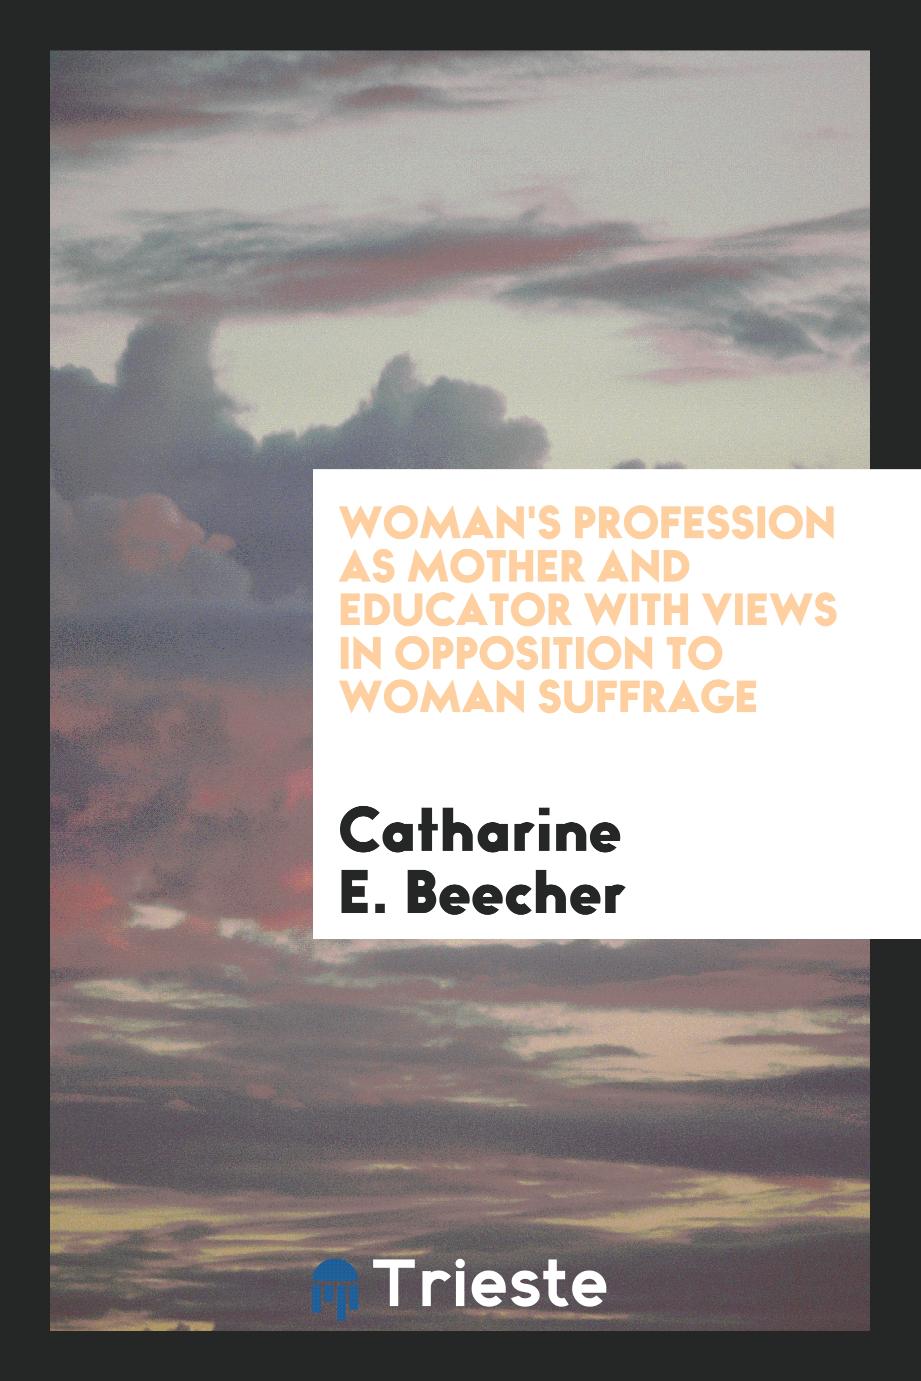 Woman's Profession as Mother and Educator with Views in Opposition to Woman Suffrage